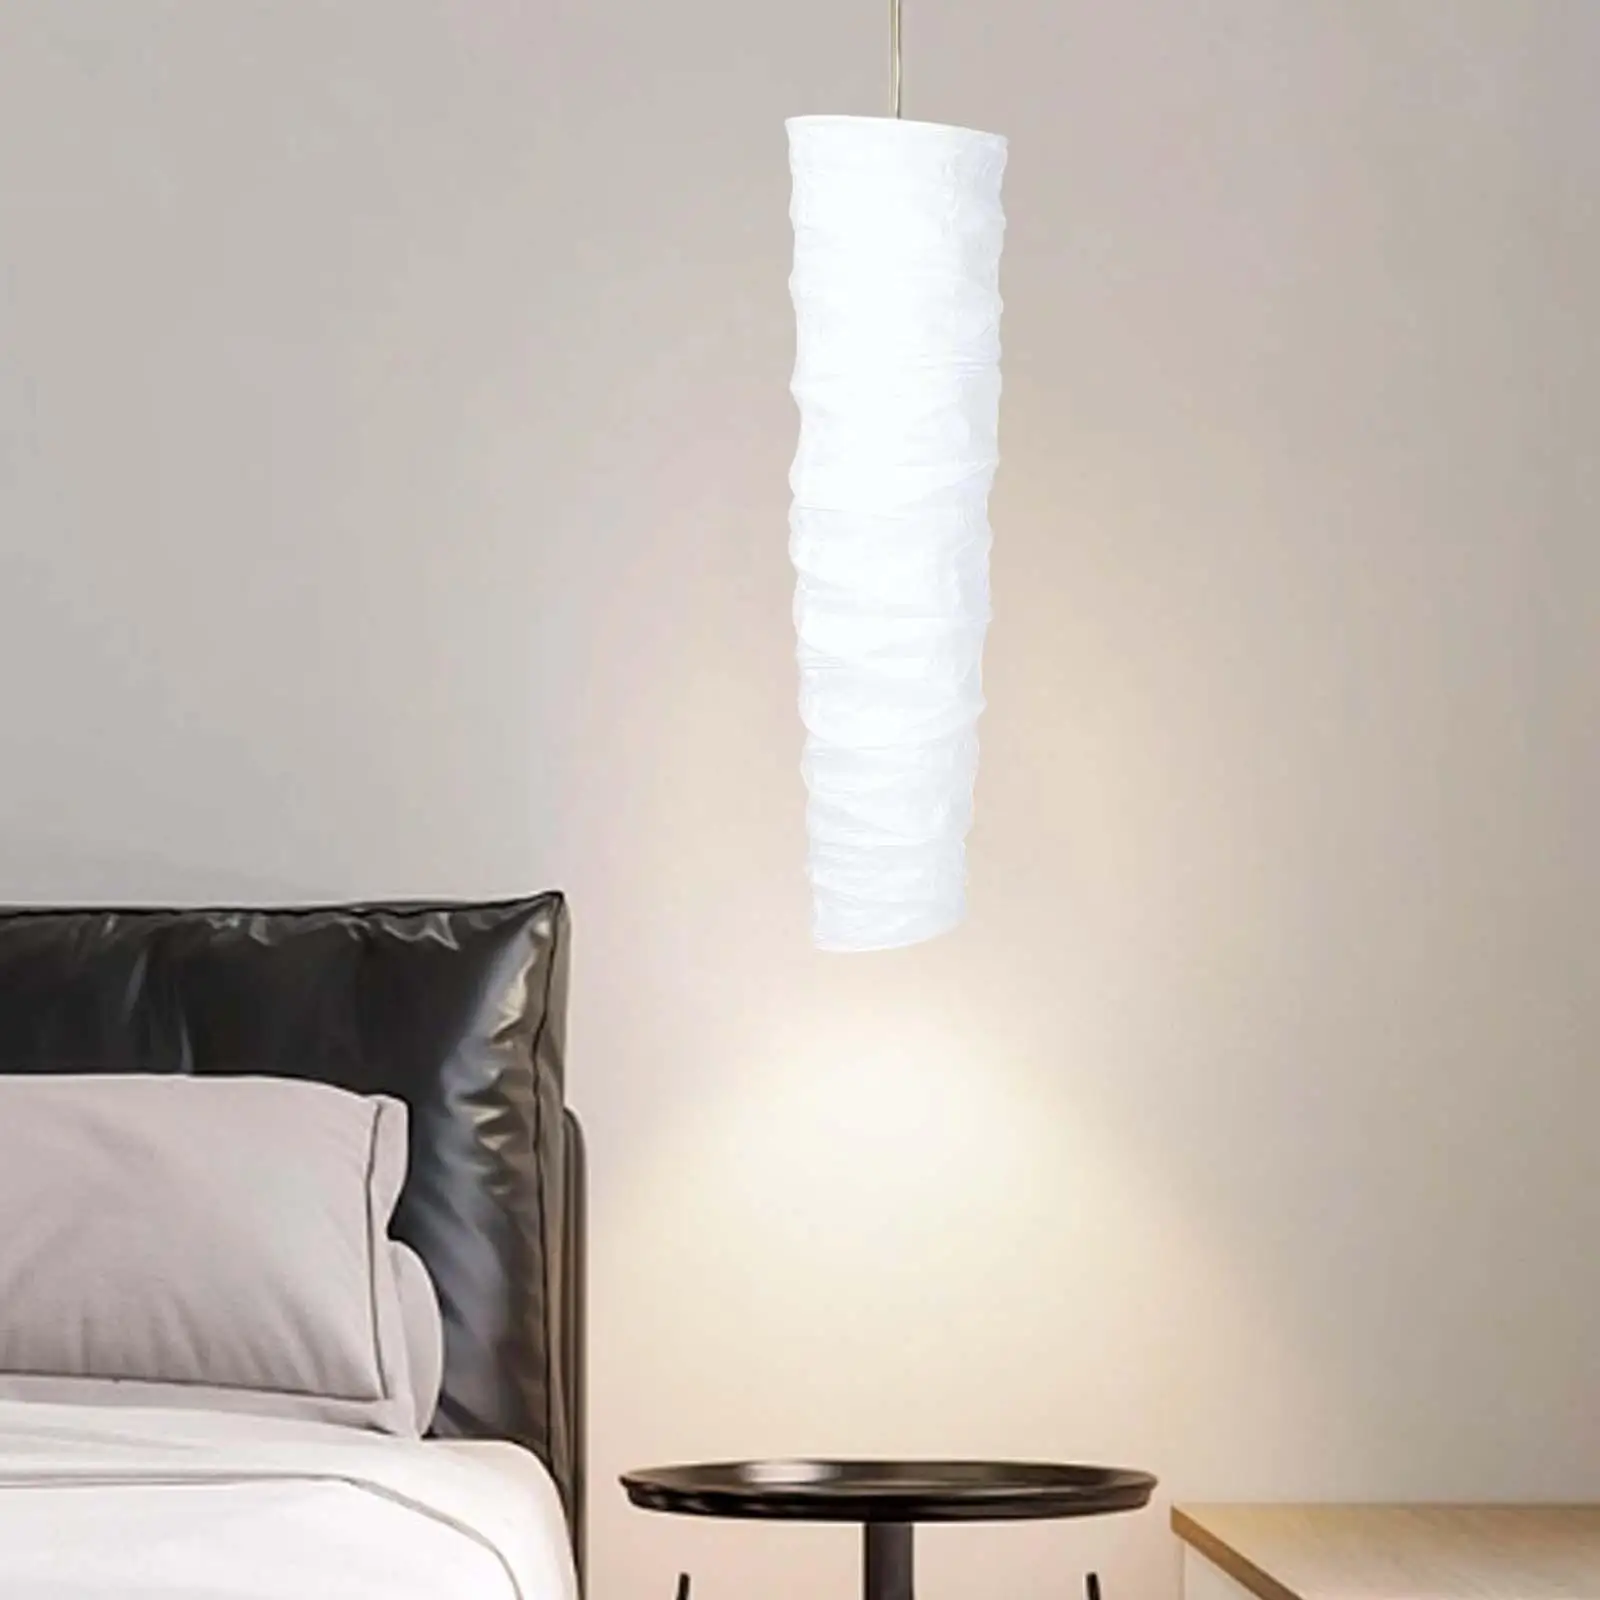 Paper Lamp Shade Droplight Decors Lampshade Chandelier Cover Modern Floor Lamp Shade for Hotel Dining Room Bedroom Home Office